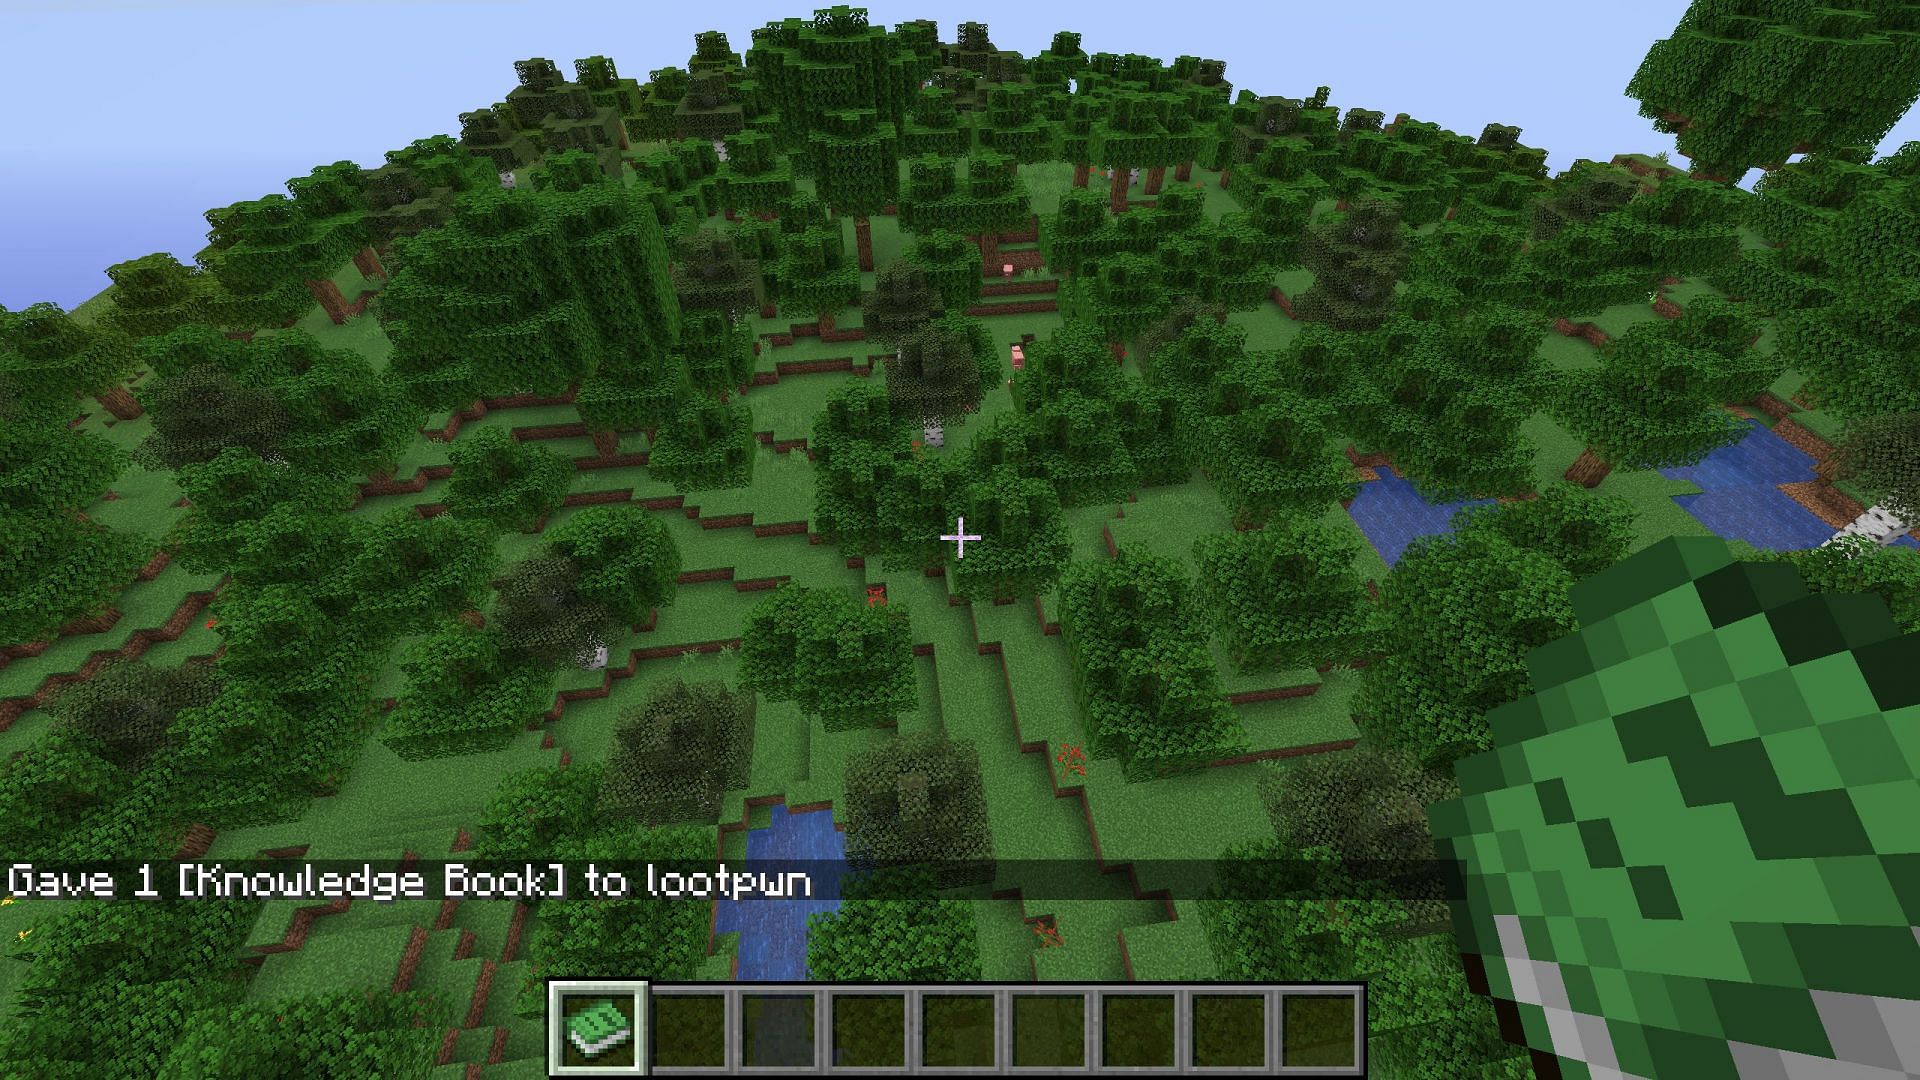 Knowledge books can only be acquired through the use of commands (Image via Minecraft)